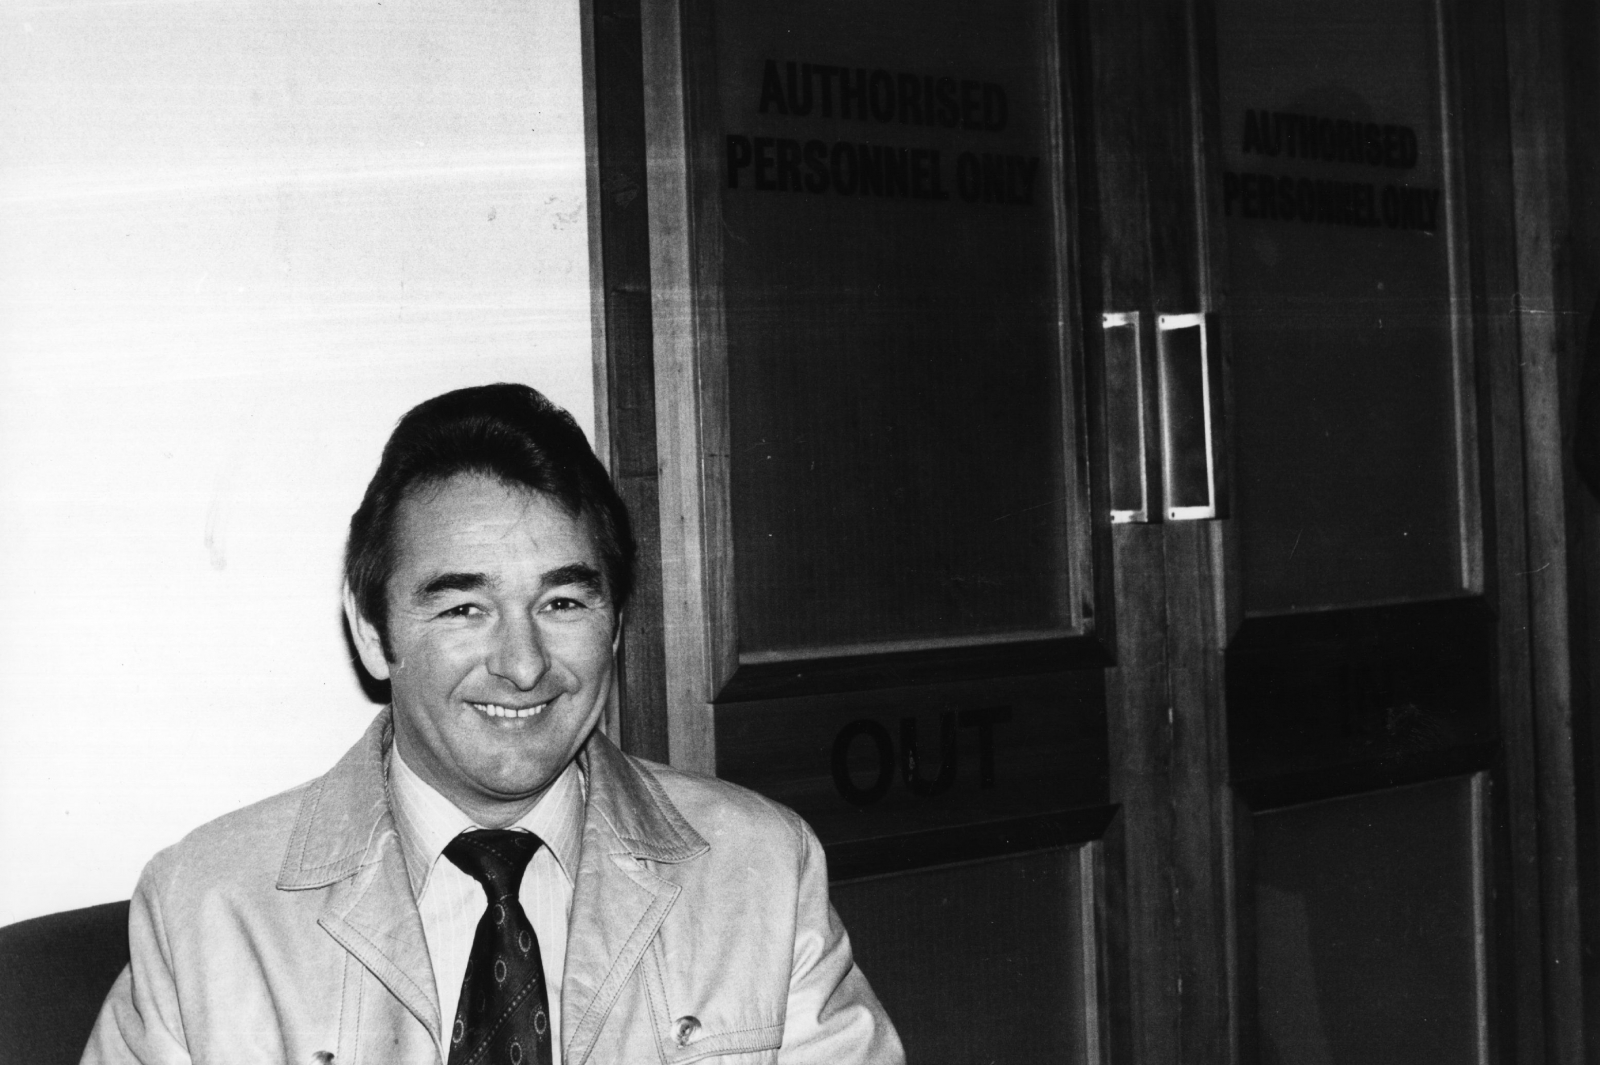 Classic Brian Clough Quotes: Remembering the Wit and 